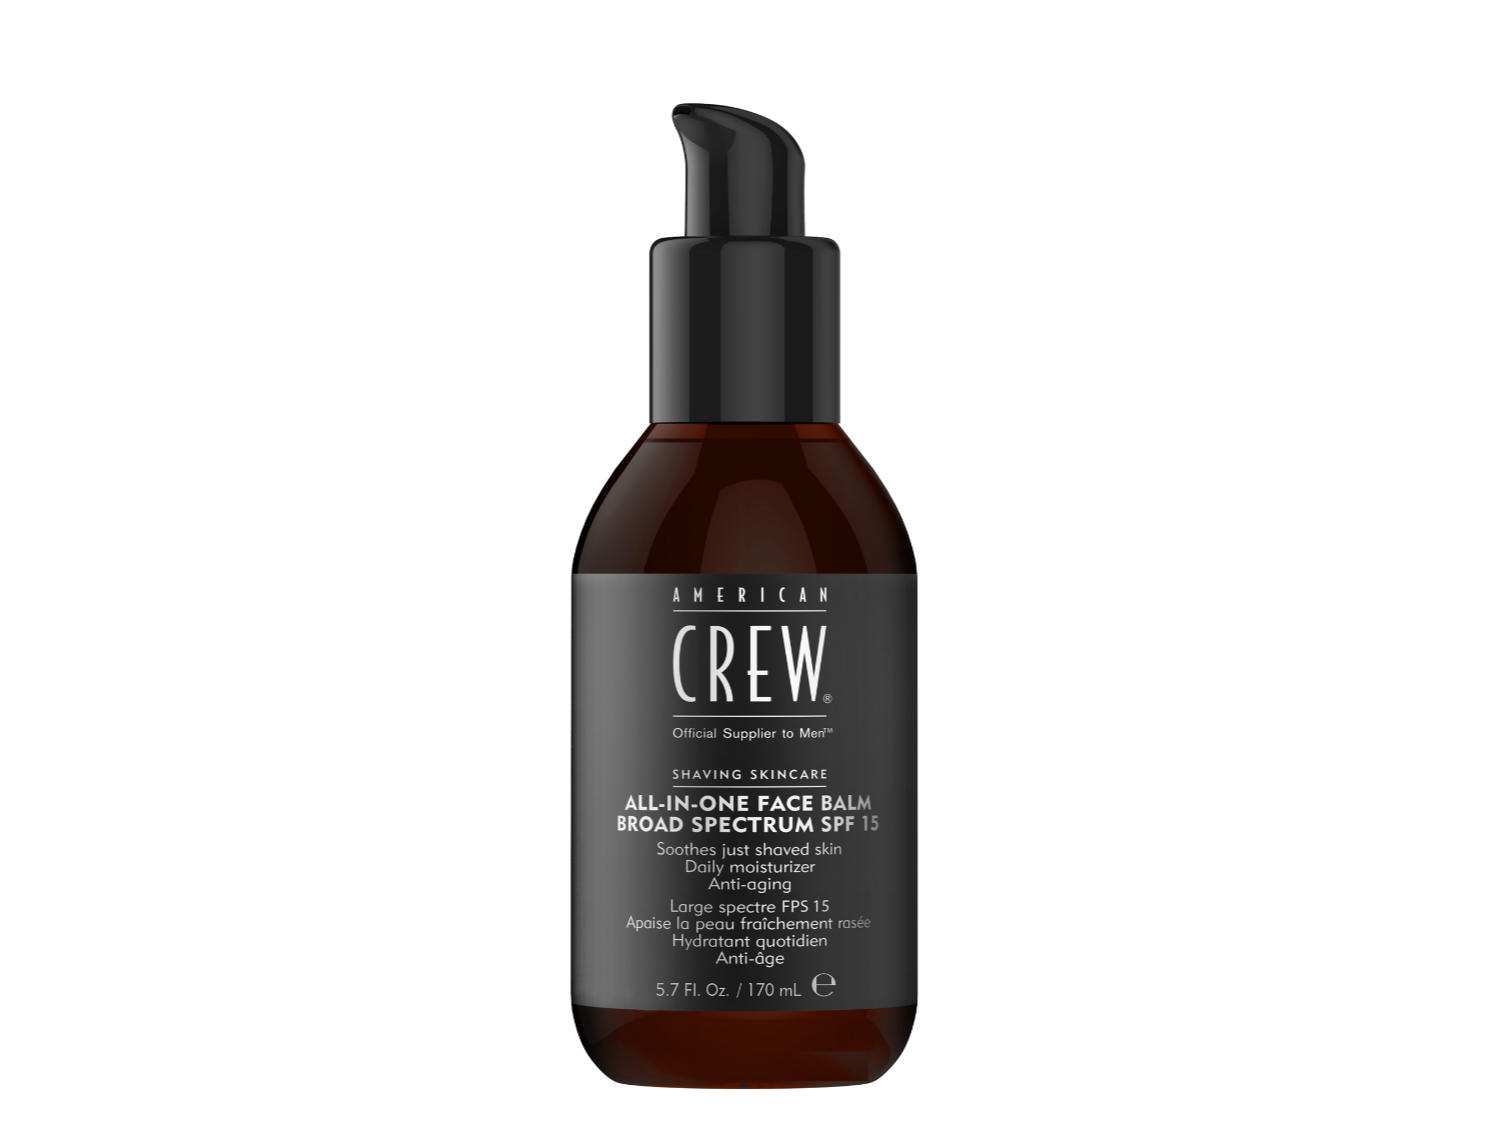 Arma Beauty - American Crew - All-in-One Face Balm (SPF 15)